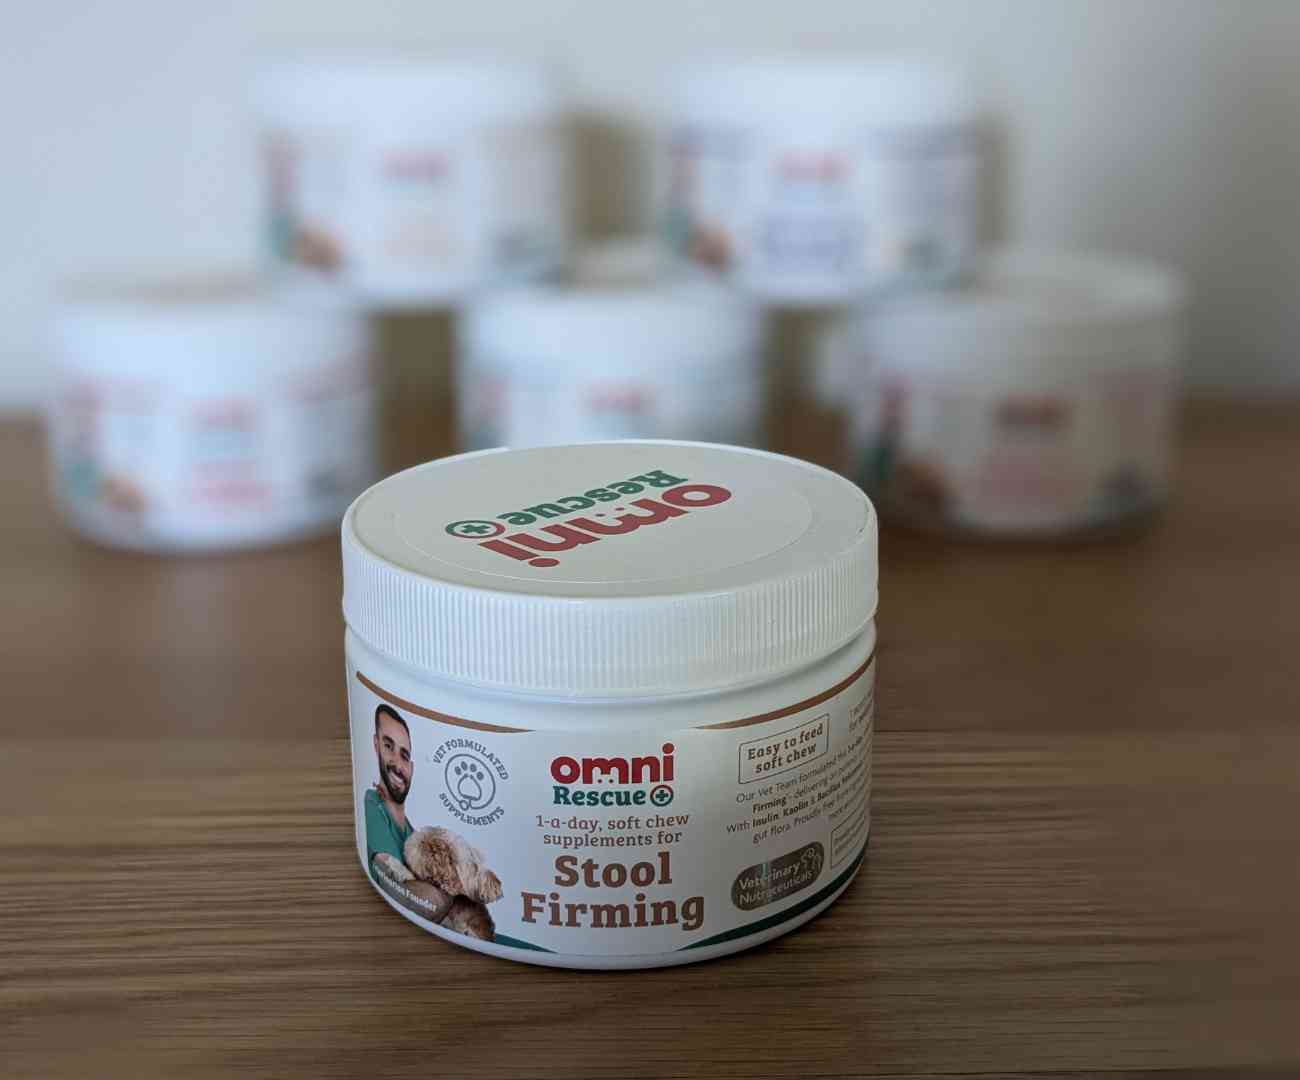 white plastic tub in the foreground, branded with 'Omni Rescue' logo, a picture of a vet holding a dog, and lettering on the front of the tub showing the contents - 1 a day soft chew Omni stool firming supplement for dogs. Additional lettering advises that the product is vet formulated. In the blurred background are 5 more stacked tubs of Omni supplements for different conditions